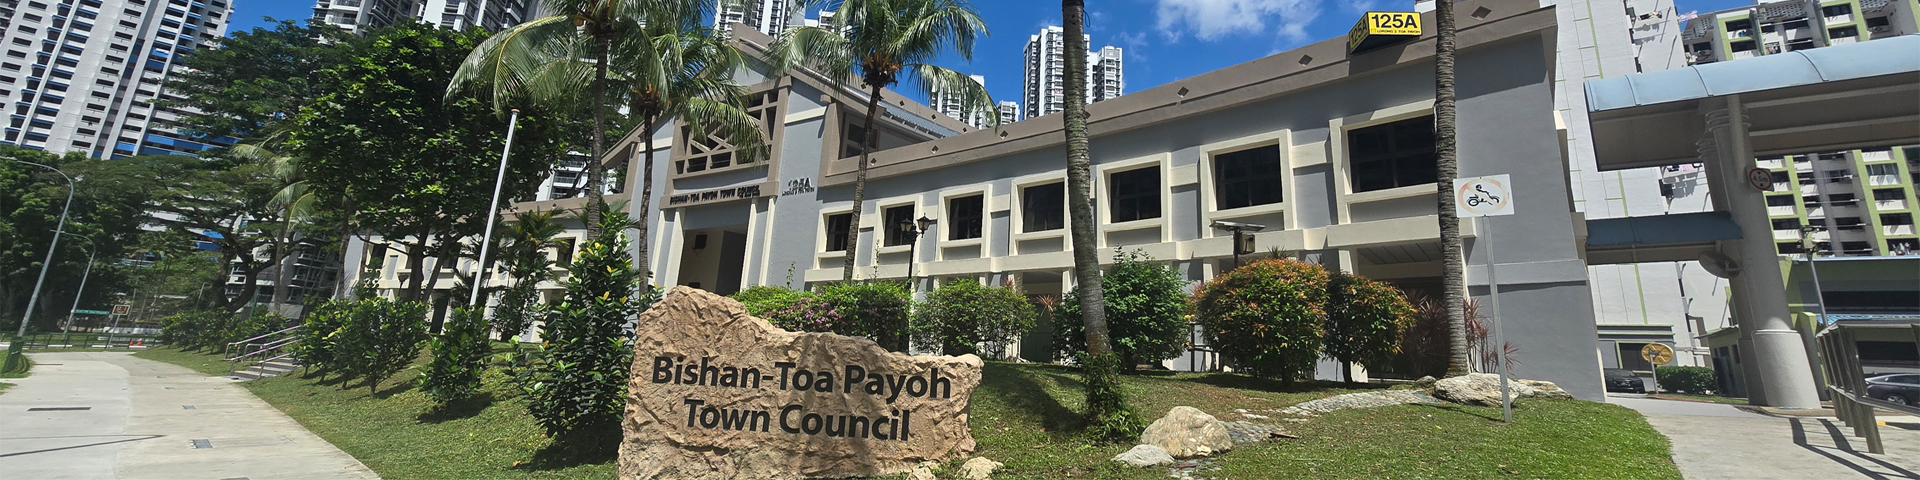 Bulky Item Removal Services - Bishan-Toa Payoh Town Council